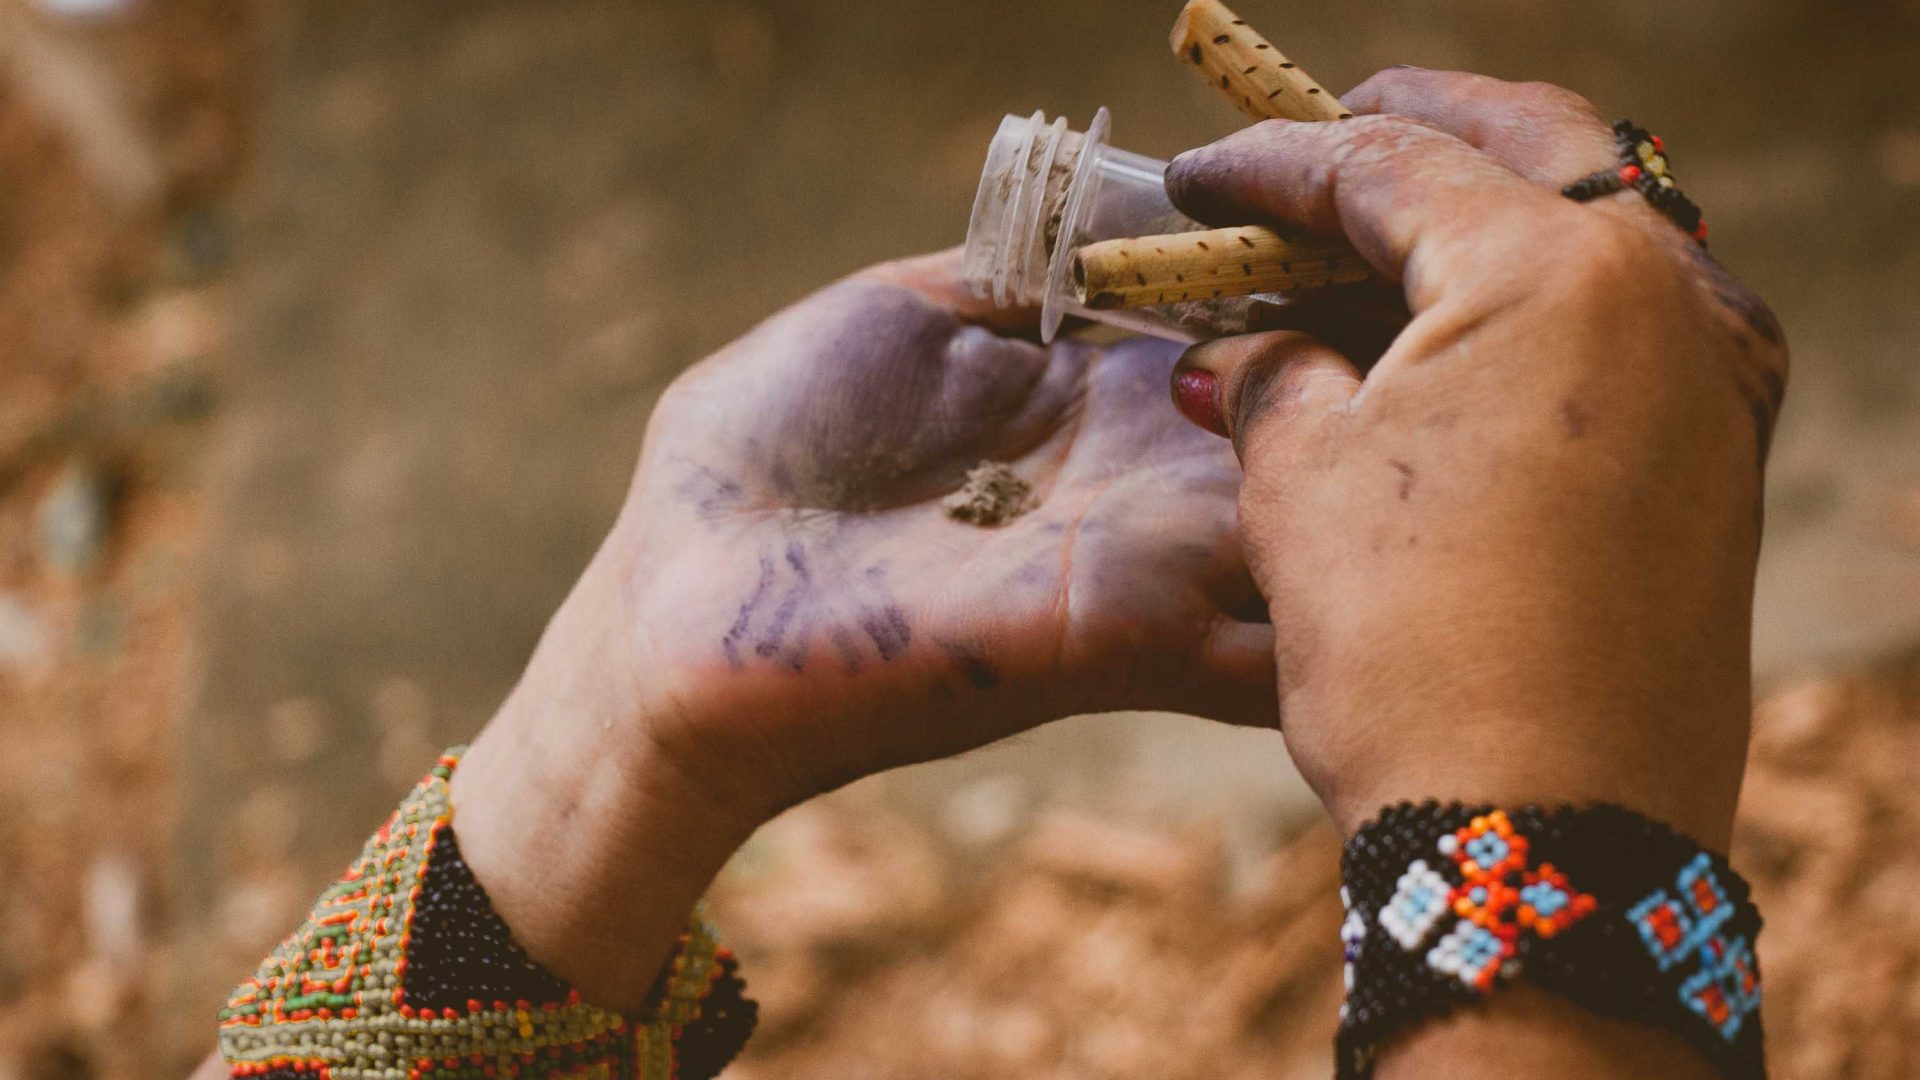 A persons tips out some traditional medicine into their hands.